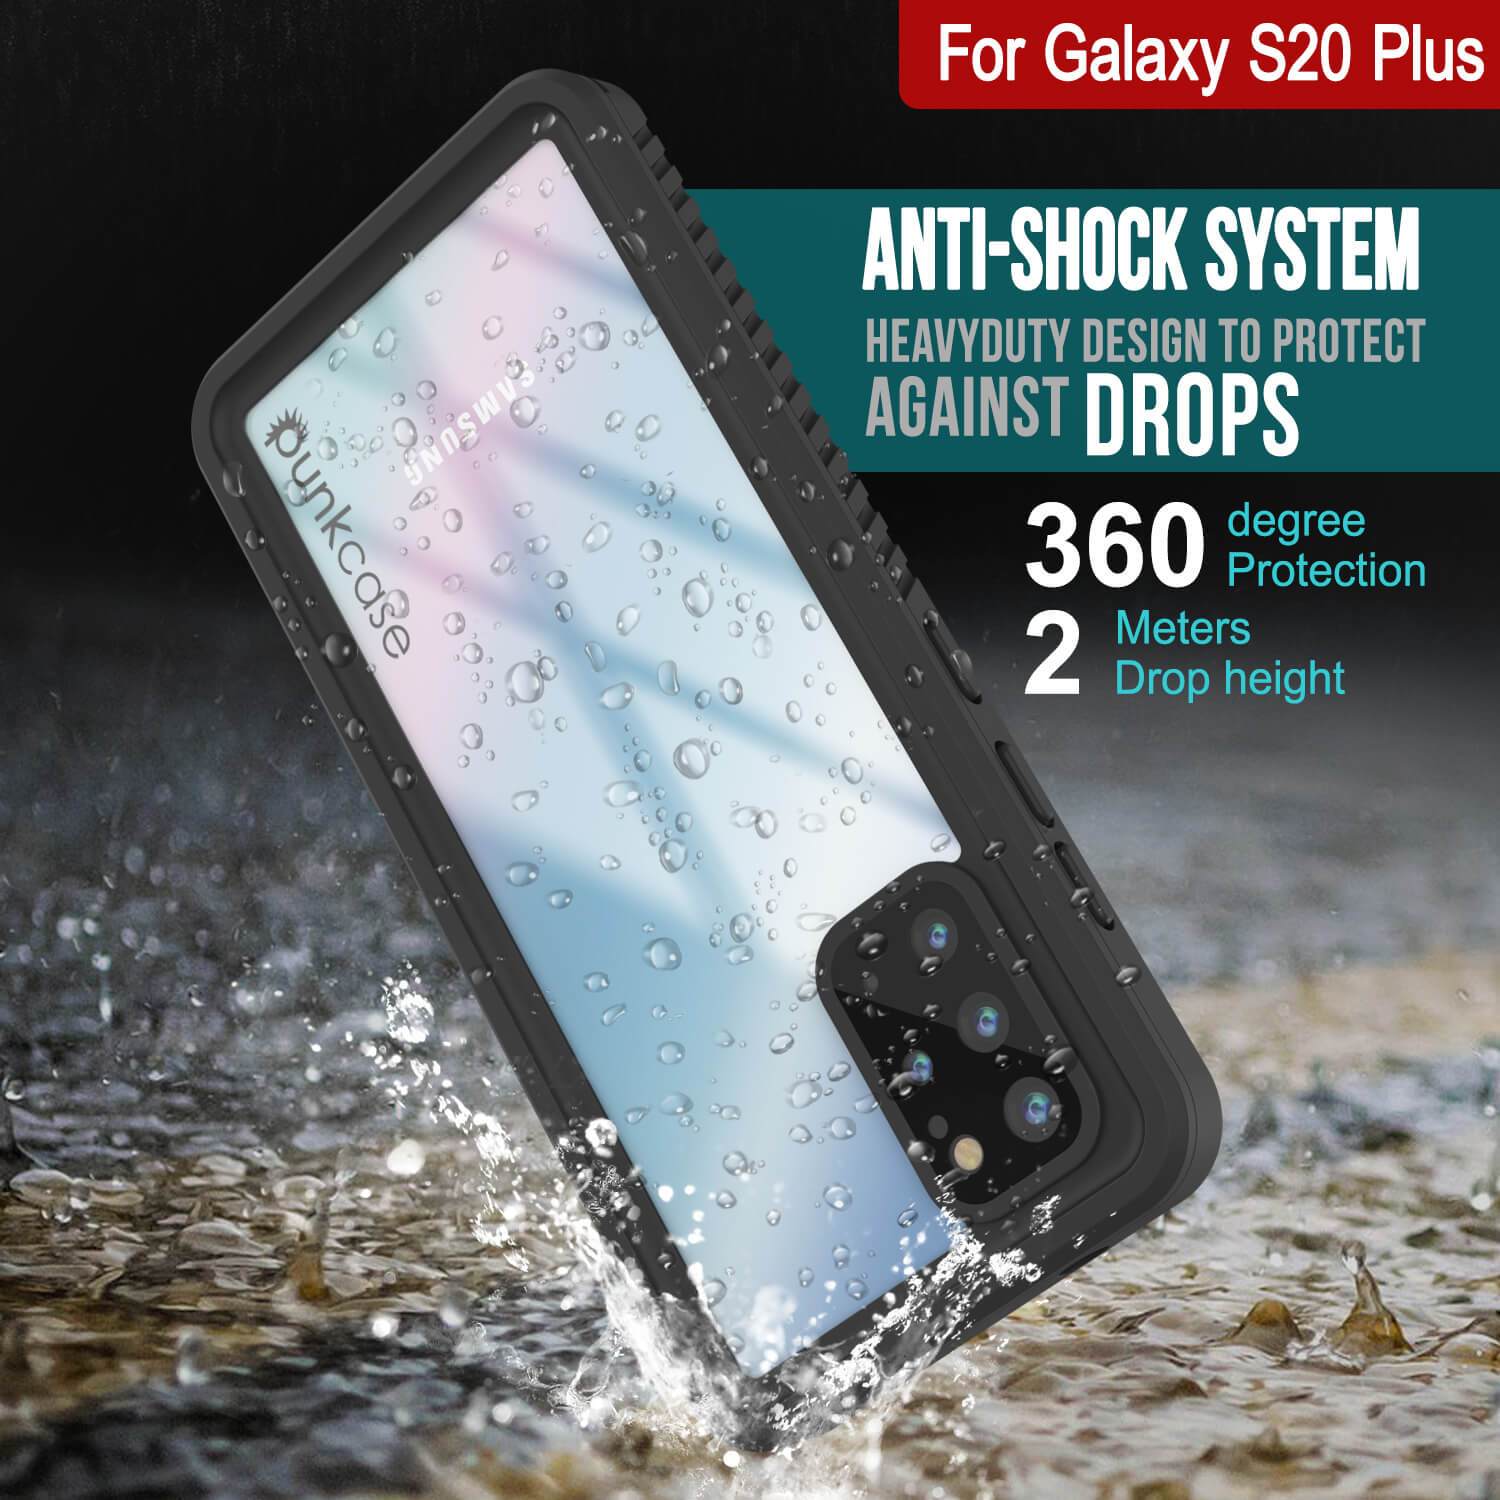 Galaxy S20+ Plus Water/Shockproof [Extreme Series] With Screen Protector Case [Black]